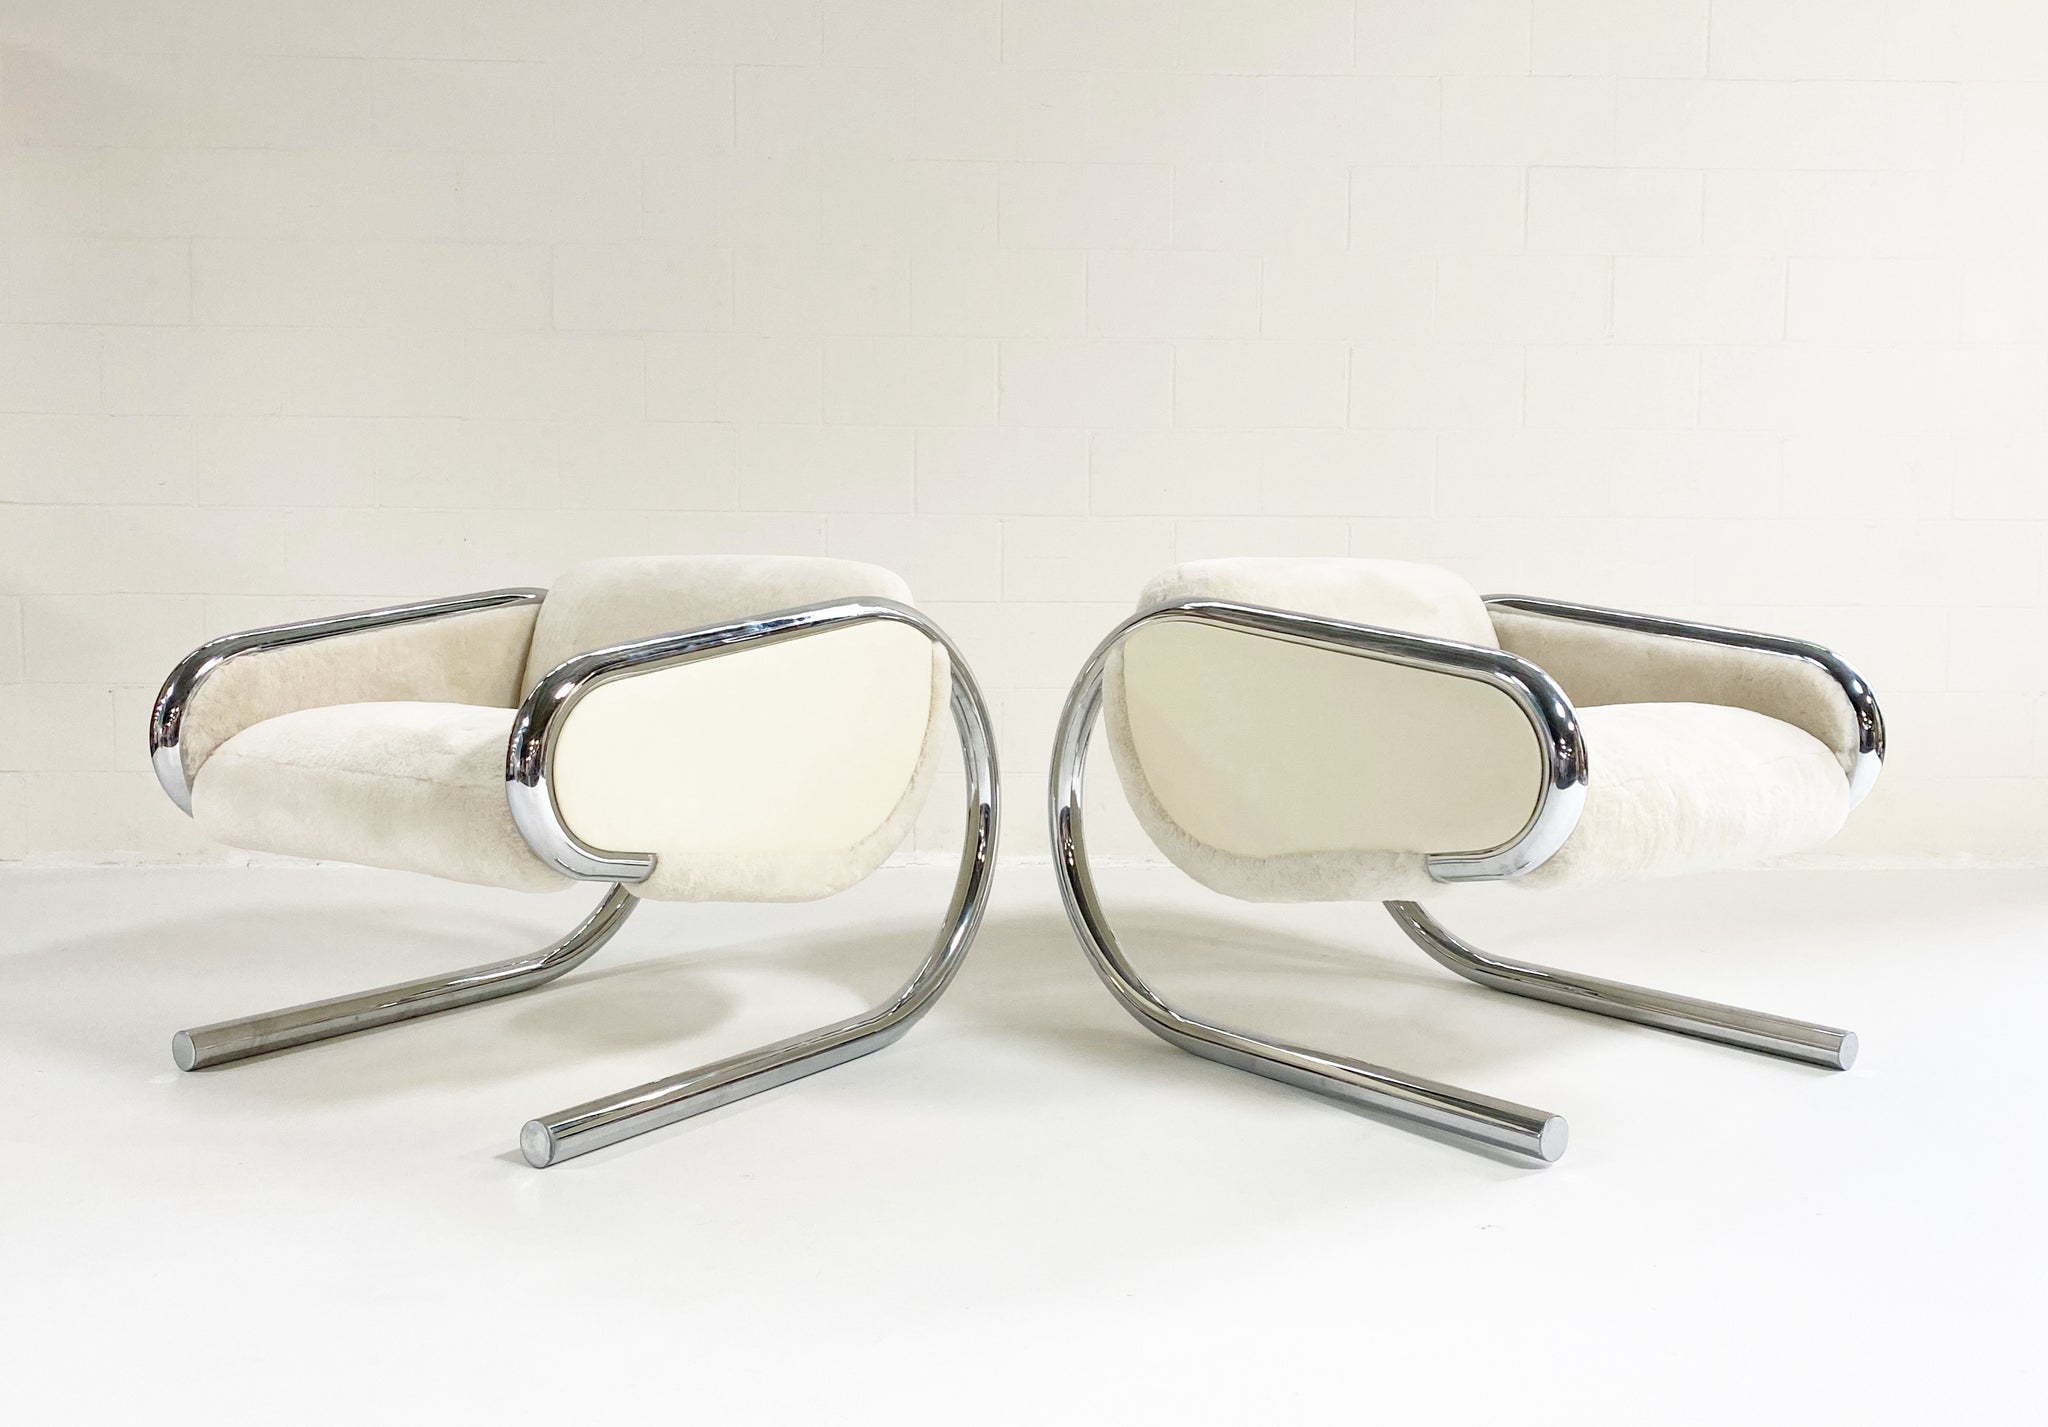 Chrome Lounge Chairs in Shearling and Leather